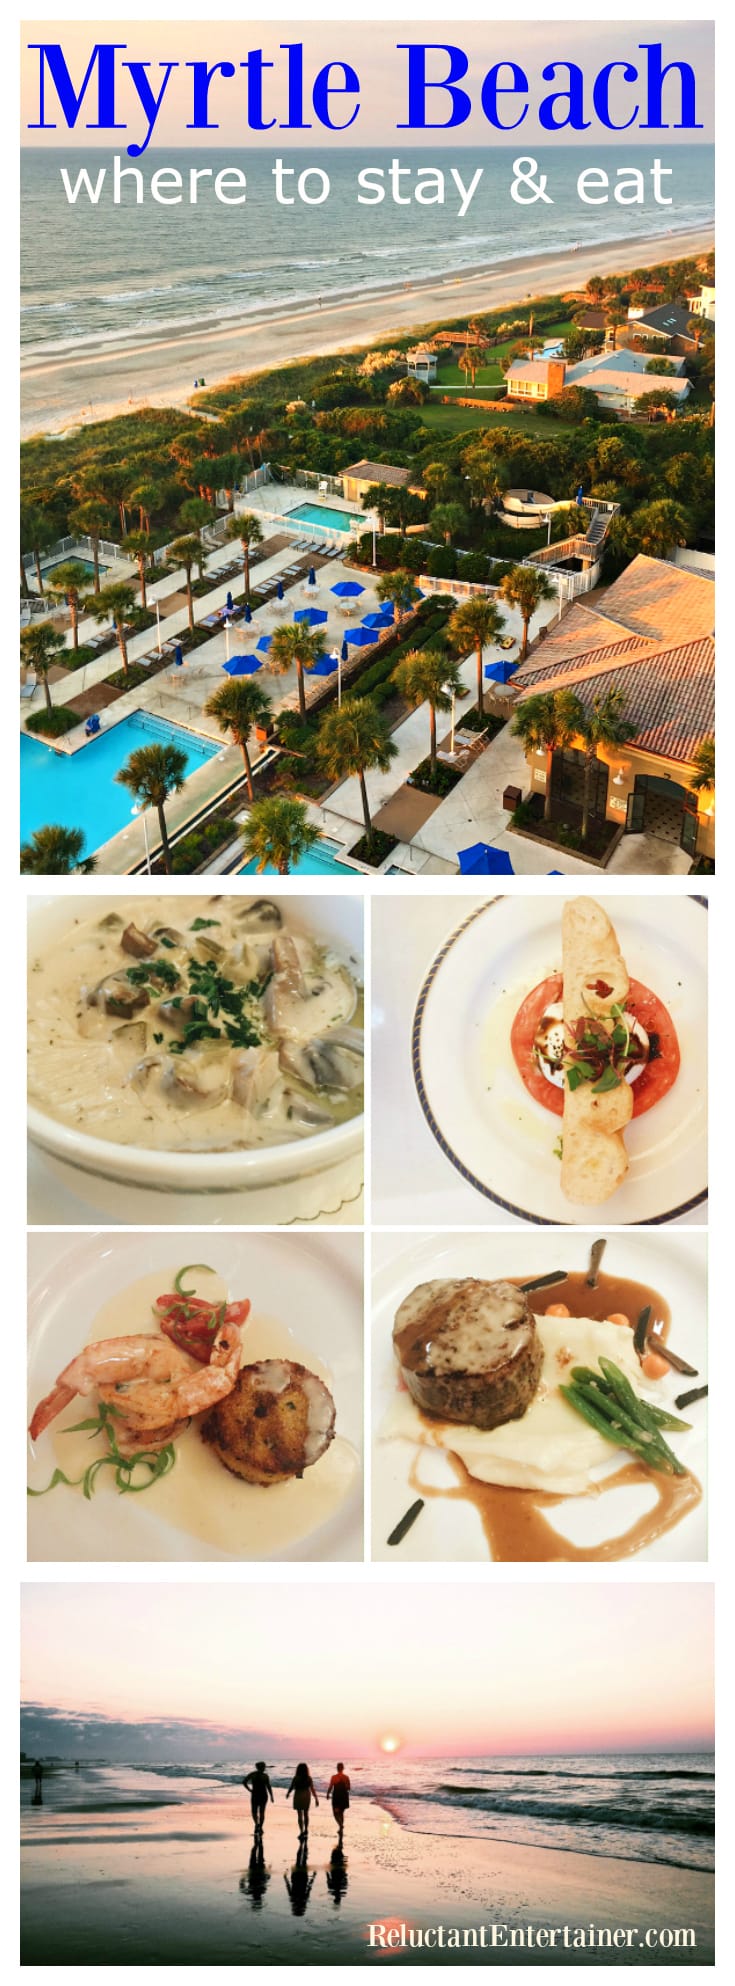 Myrtle Beach: Where to Stay and Eat